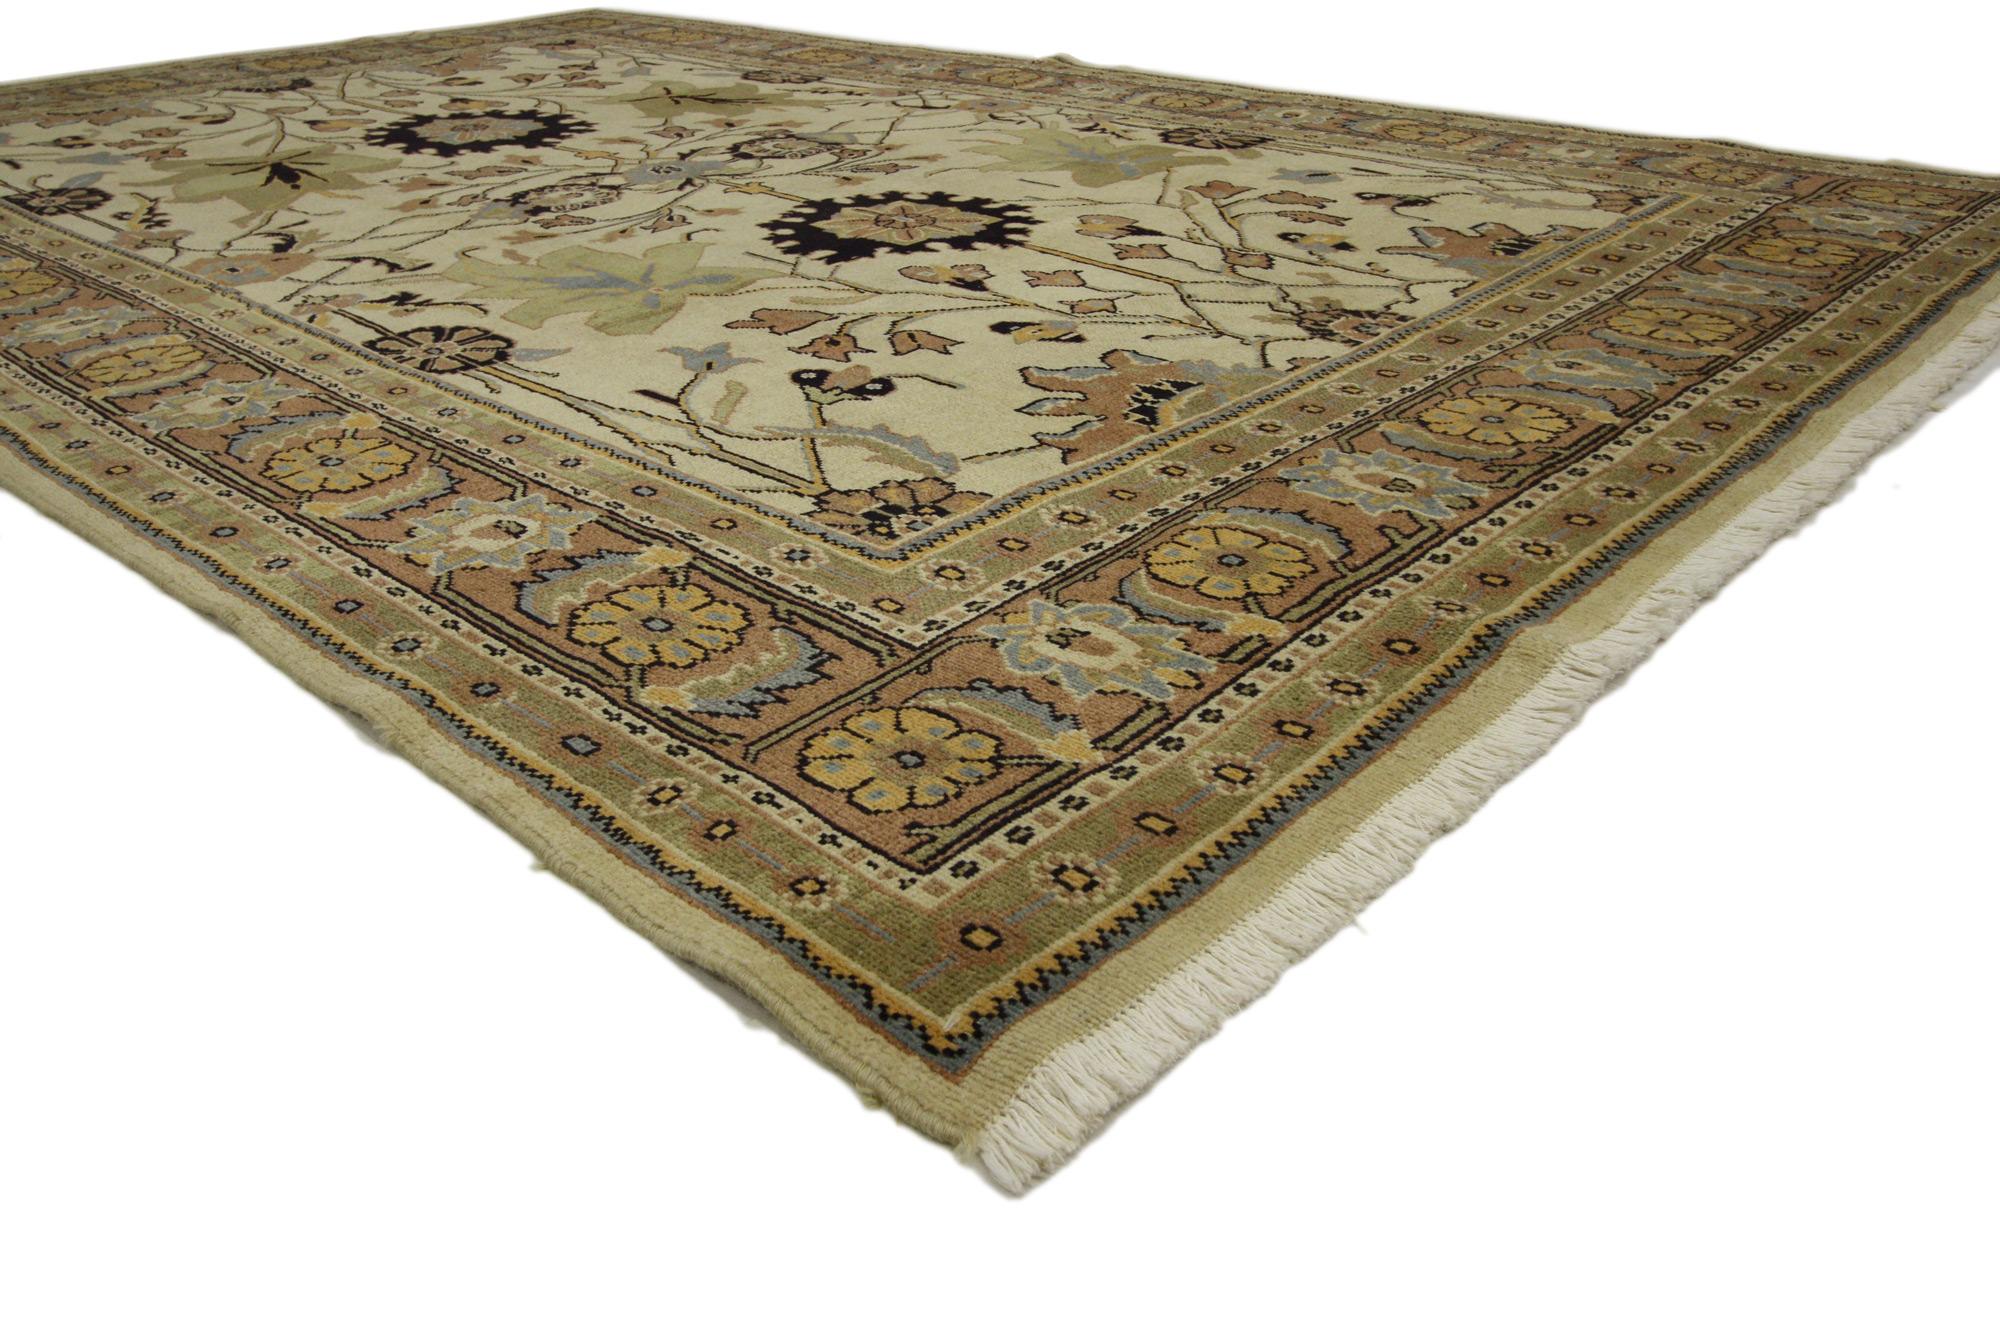 75085 Vintage Persian Mahal Rug 06'08 X 10'05.
This vintage Persian Mahal rug bears a remarkable air of chic sophistication with its modern traditional style. A beautiful display of large scale motifs delicately woven as if they are floating in the